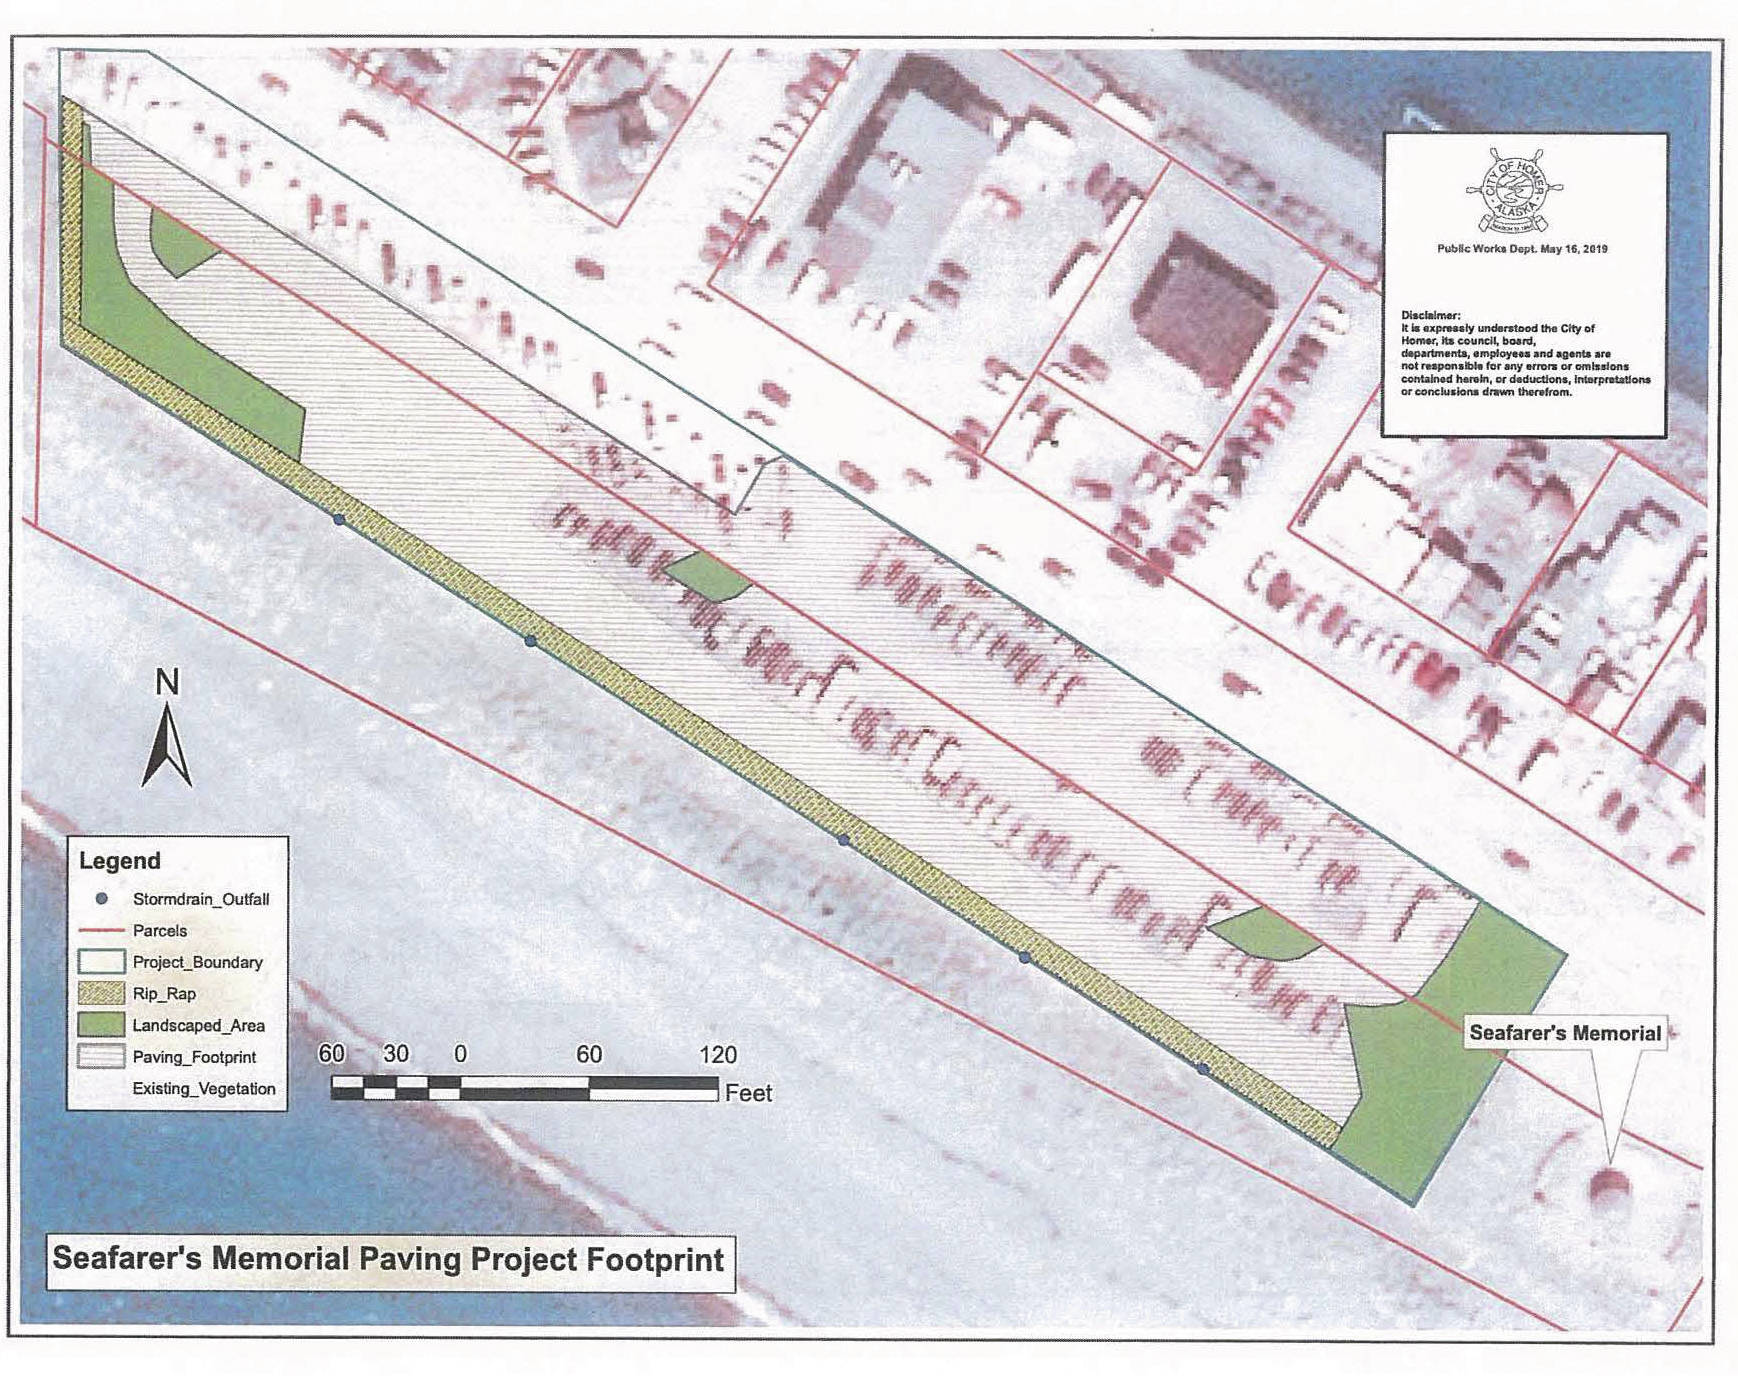 This overlay from an Oct. 2, 2019, Conditional Use Permit application shows the proposed Seafarers Memorial parking lot expansion superimposed on an aerial photo of the existing lot and beach. (Photo provided, City of Homer)